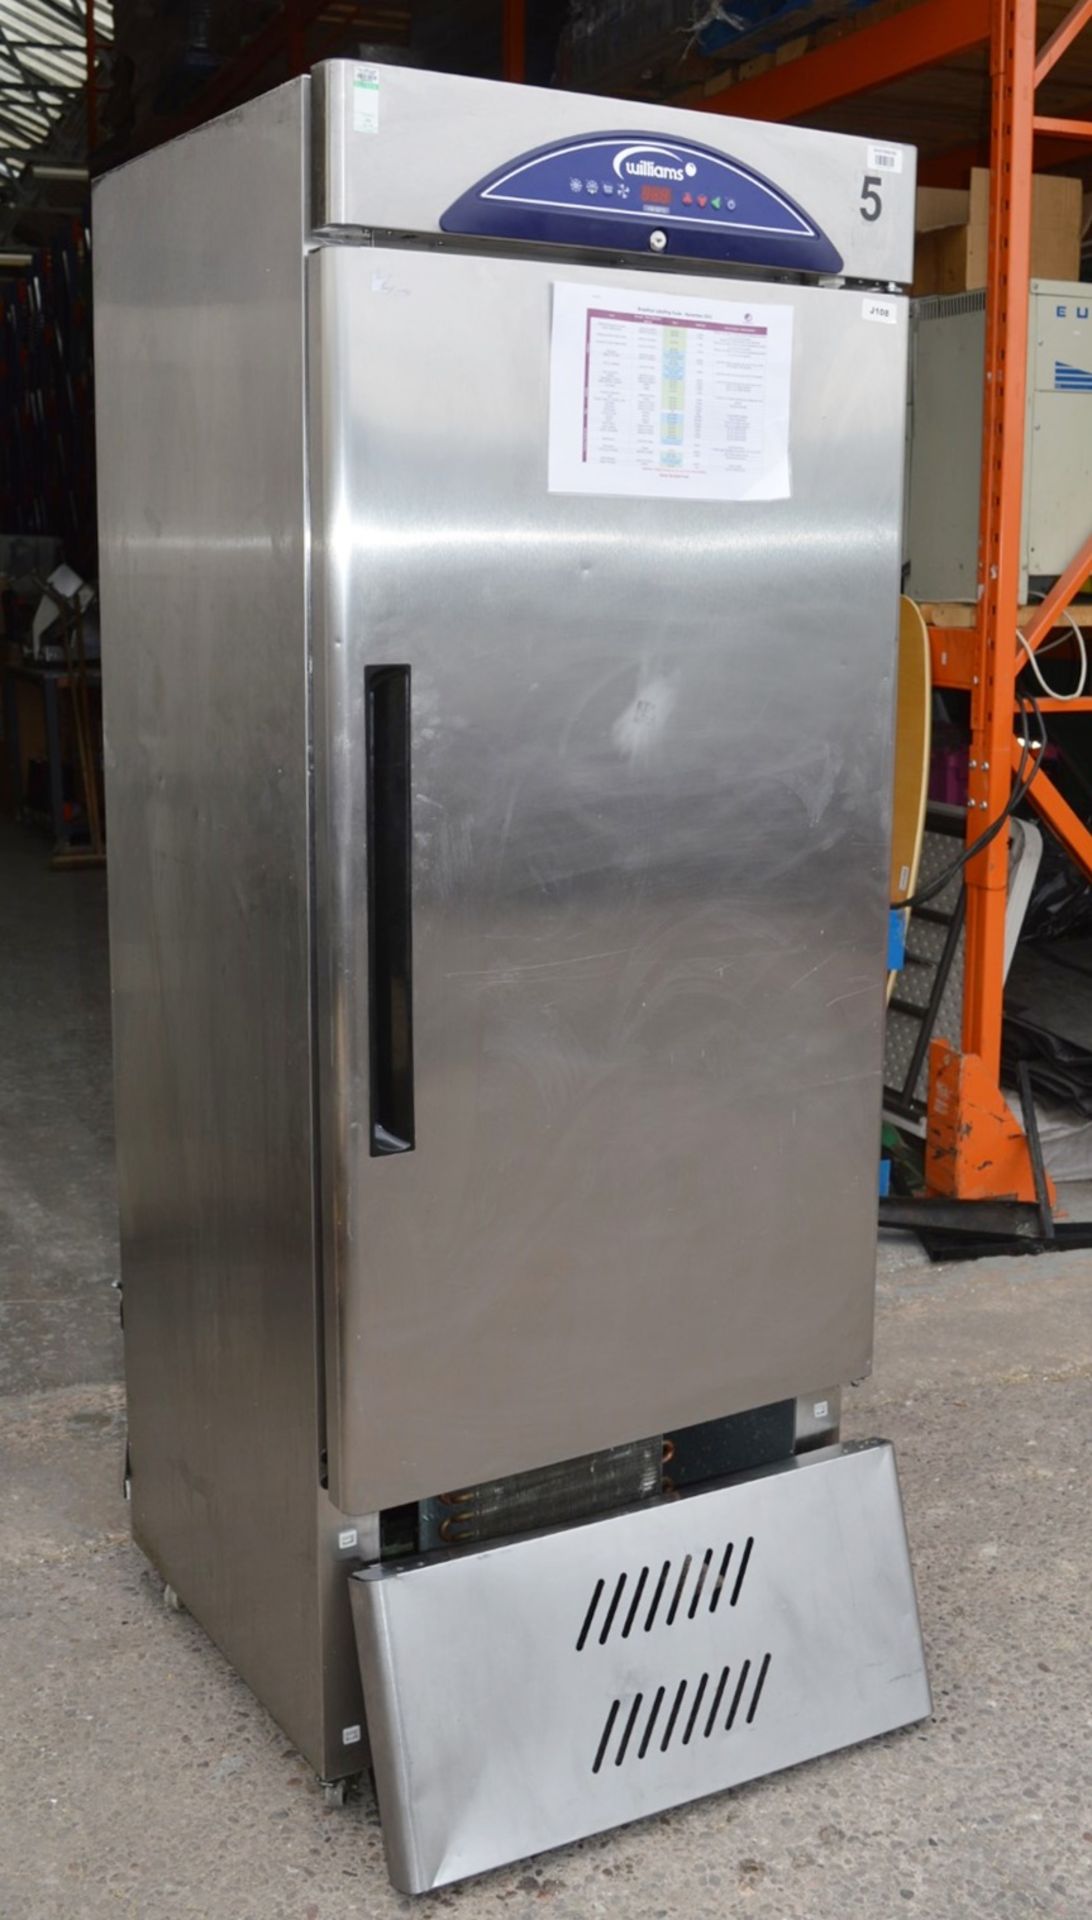 1 x Williams Single Door Upright Refrigerator  - Model HZ16-WB - Stainless Steel Finish - Suitable